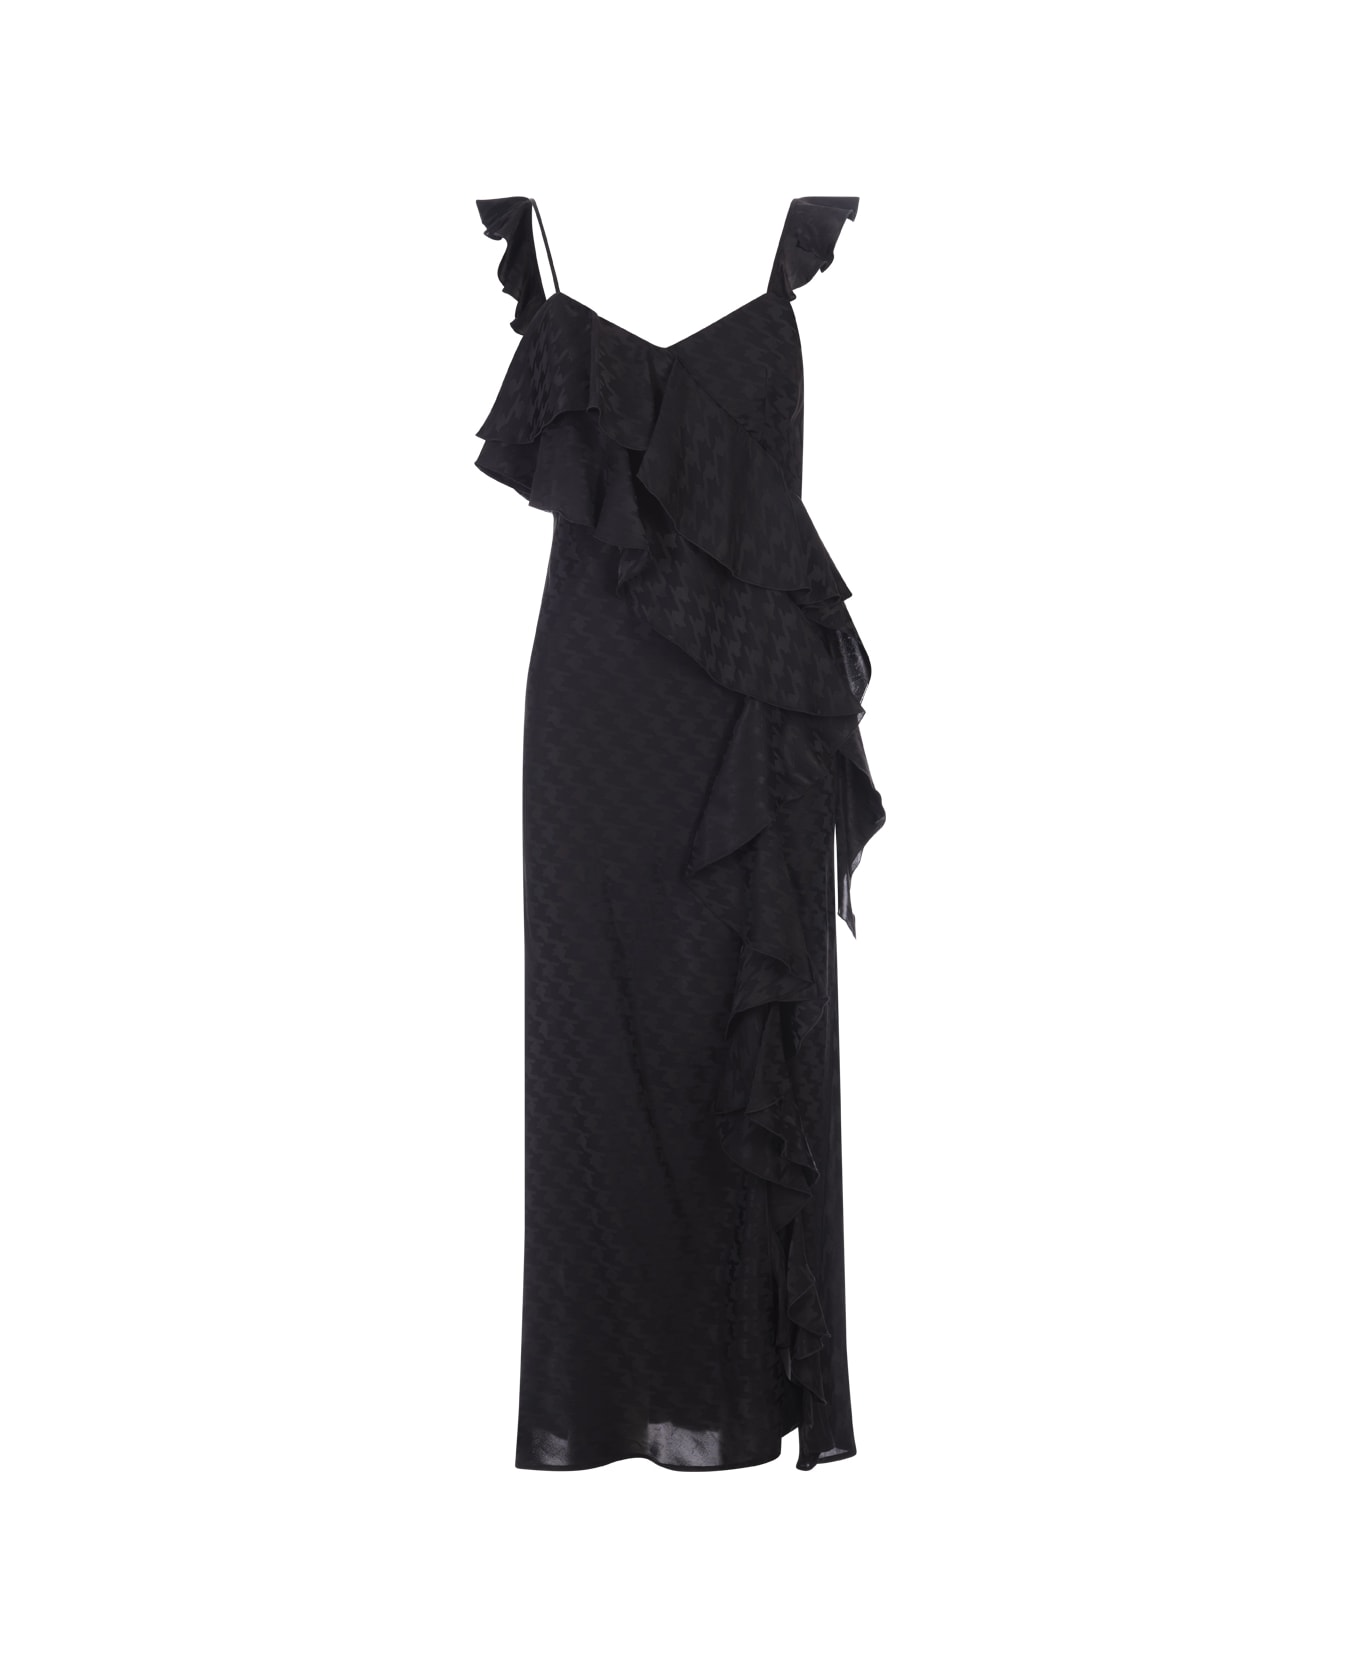 MSGM Black Midi Dress With Ruffle And Houndstooth Pattern - Black